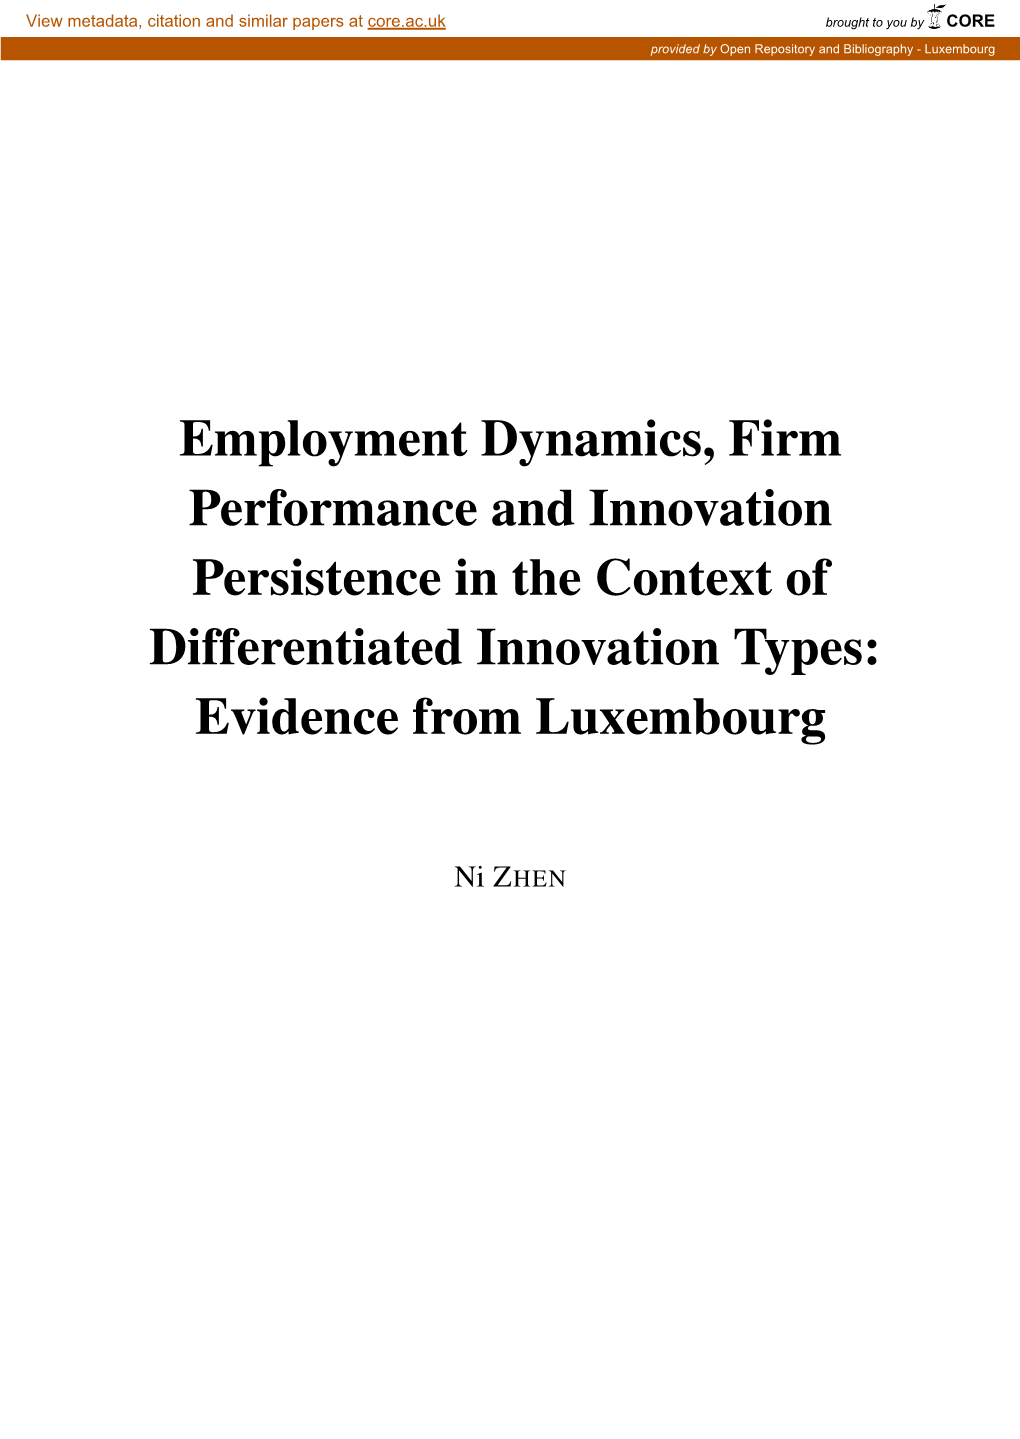 Employment Dynamics, Firm Performance and Innovation Persistence in the Context of Differentiated Innovation Types: Evidence from Luxembourg